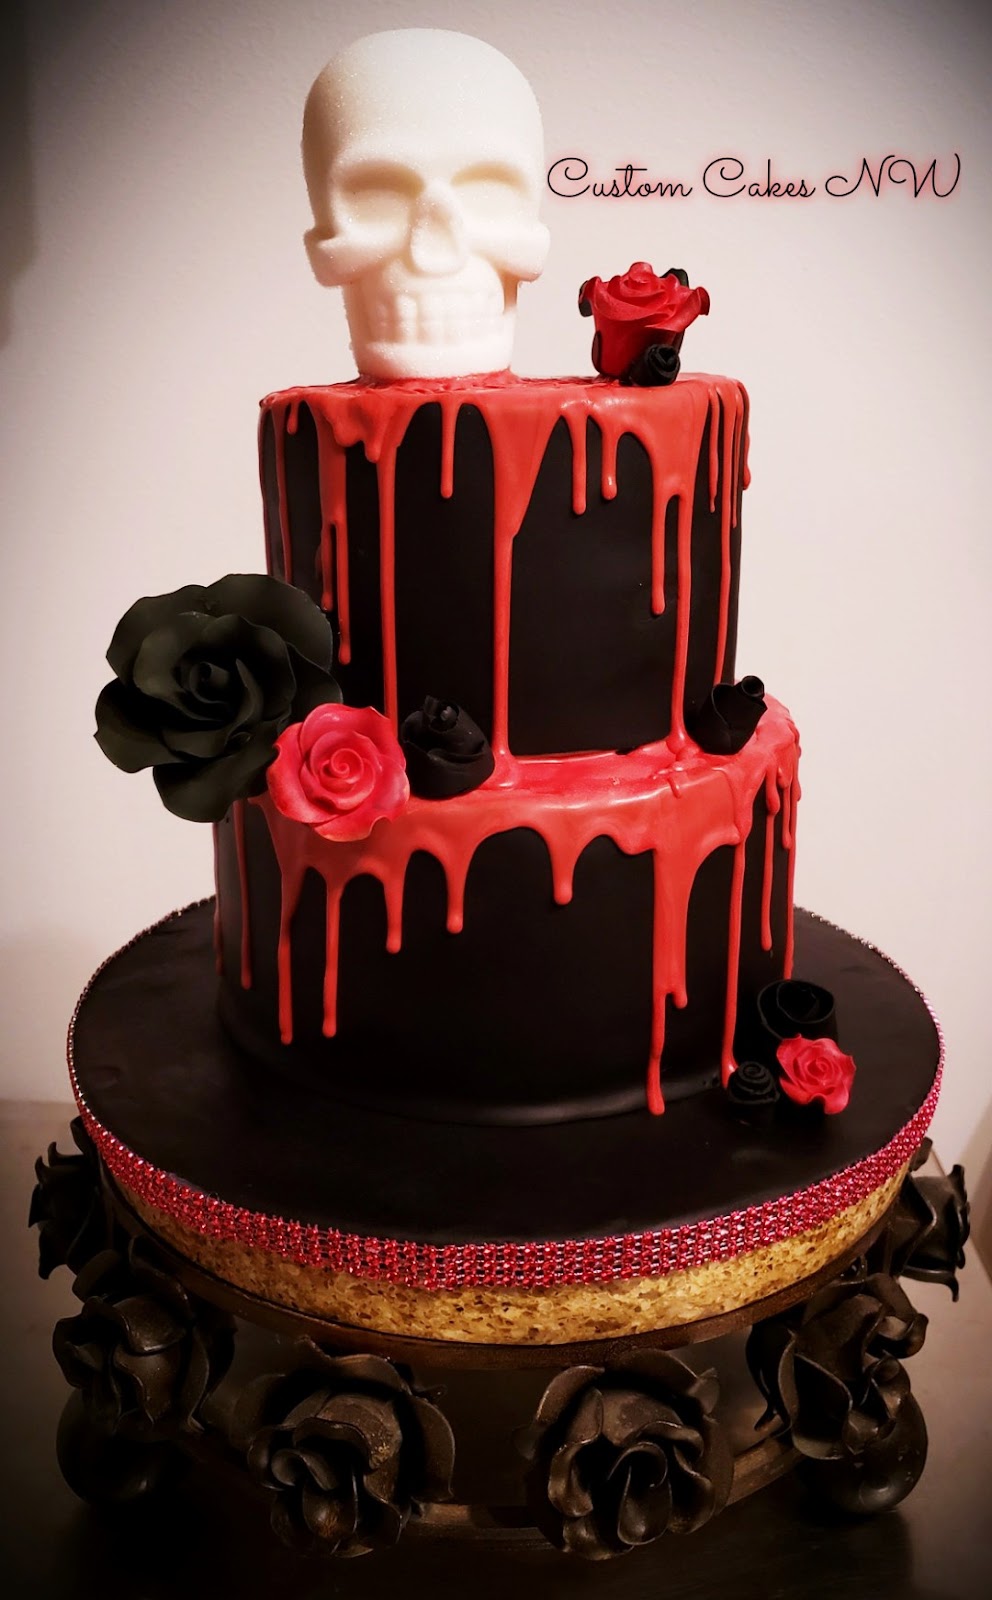 Custom Cakes NW | APPOINTMENT ONLY, 16750 NE Welch Rd, Newberg, OR 97132, USA | Phone: (503) 538-0530